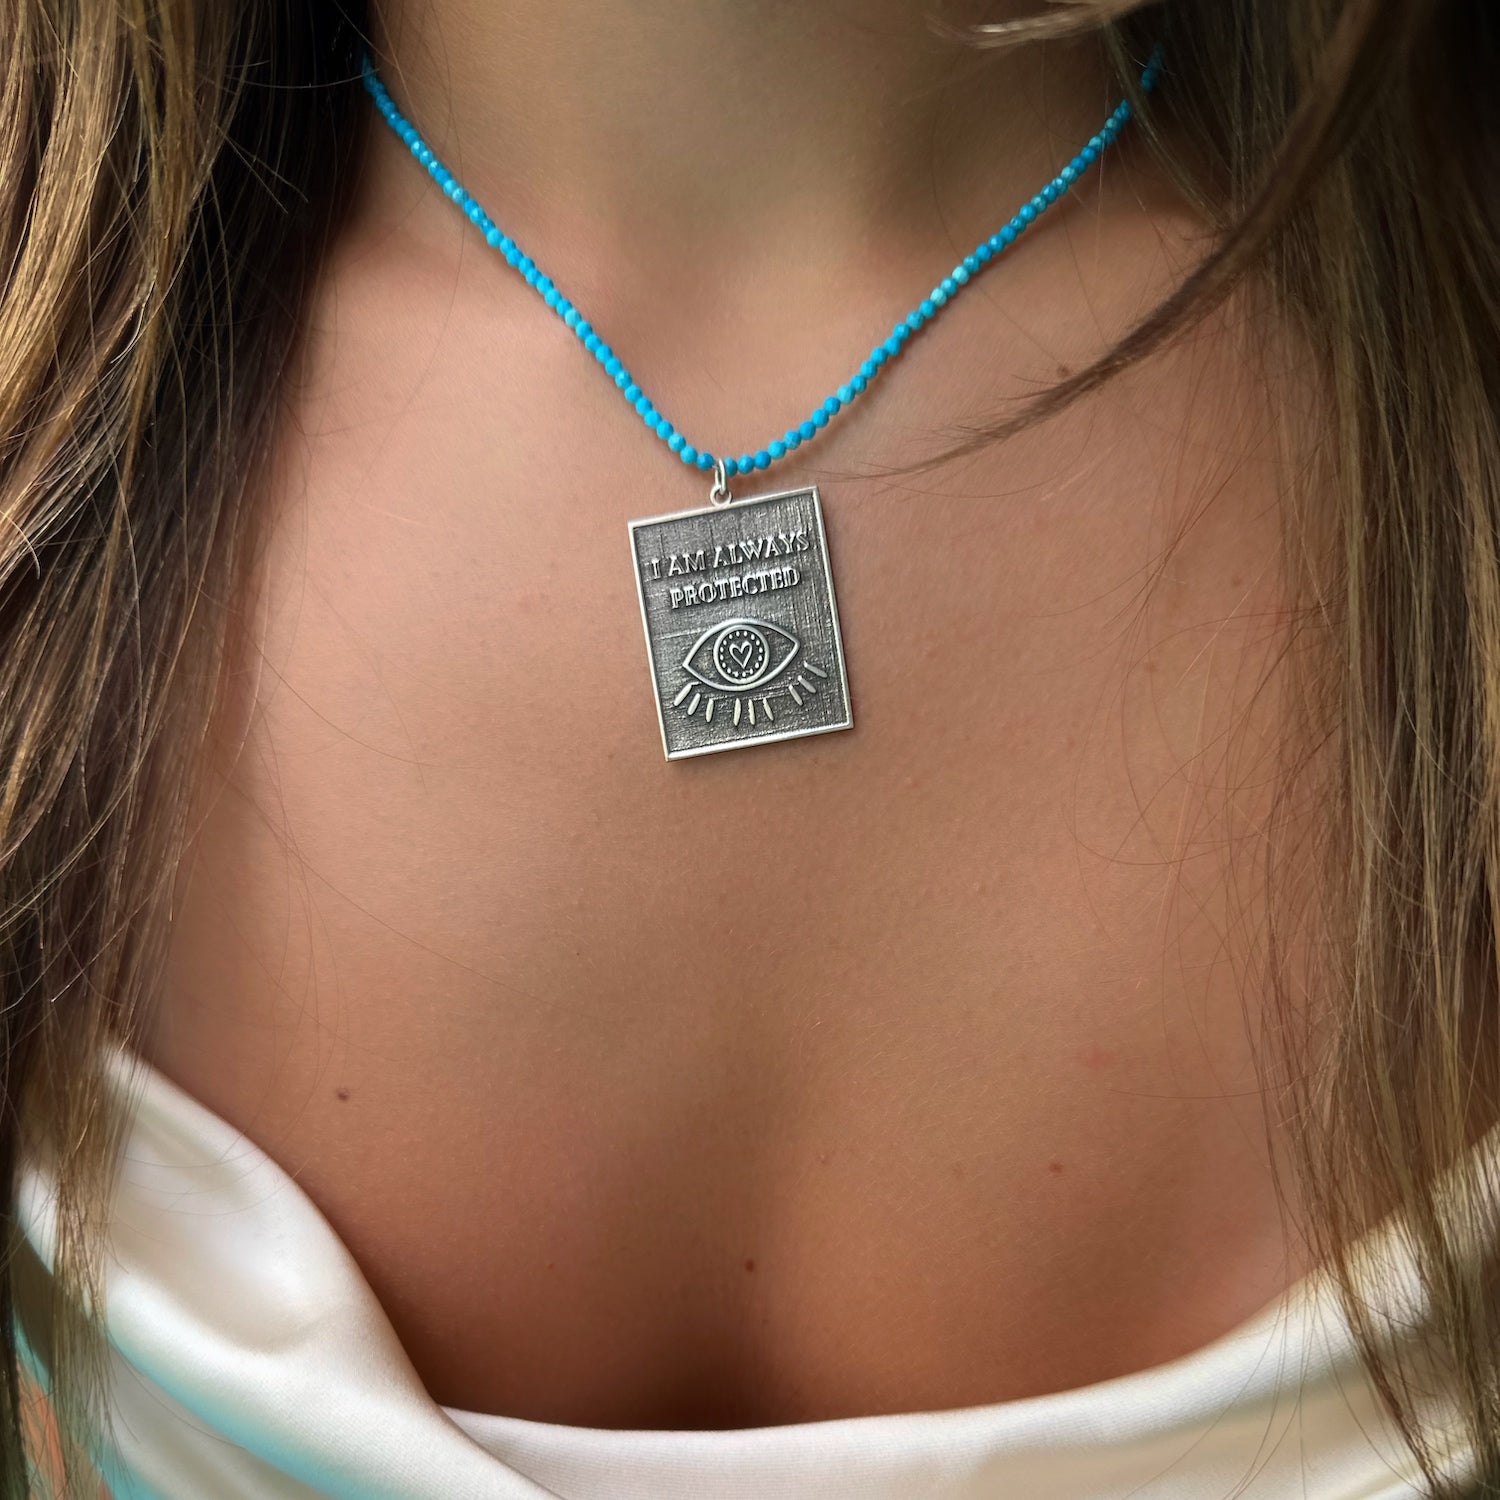 A model confidently wearing the Turquoise &#39;I Am Always Protected&#39; Necklace, embodying inner strength